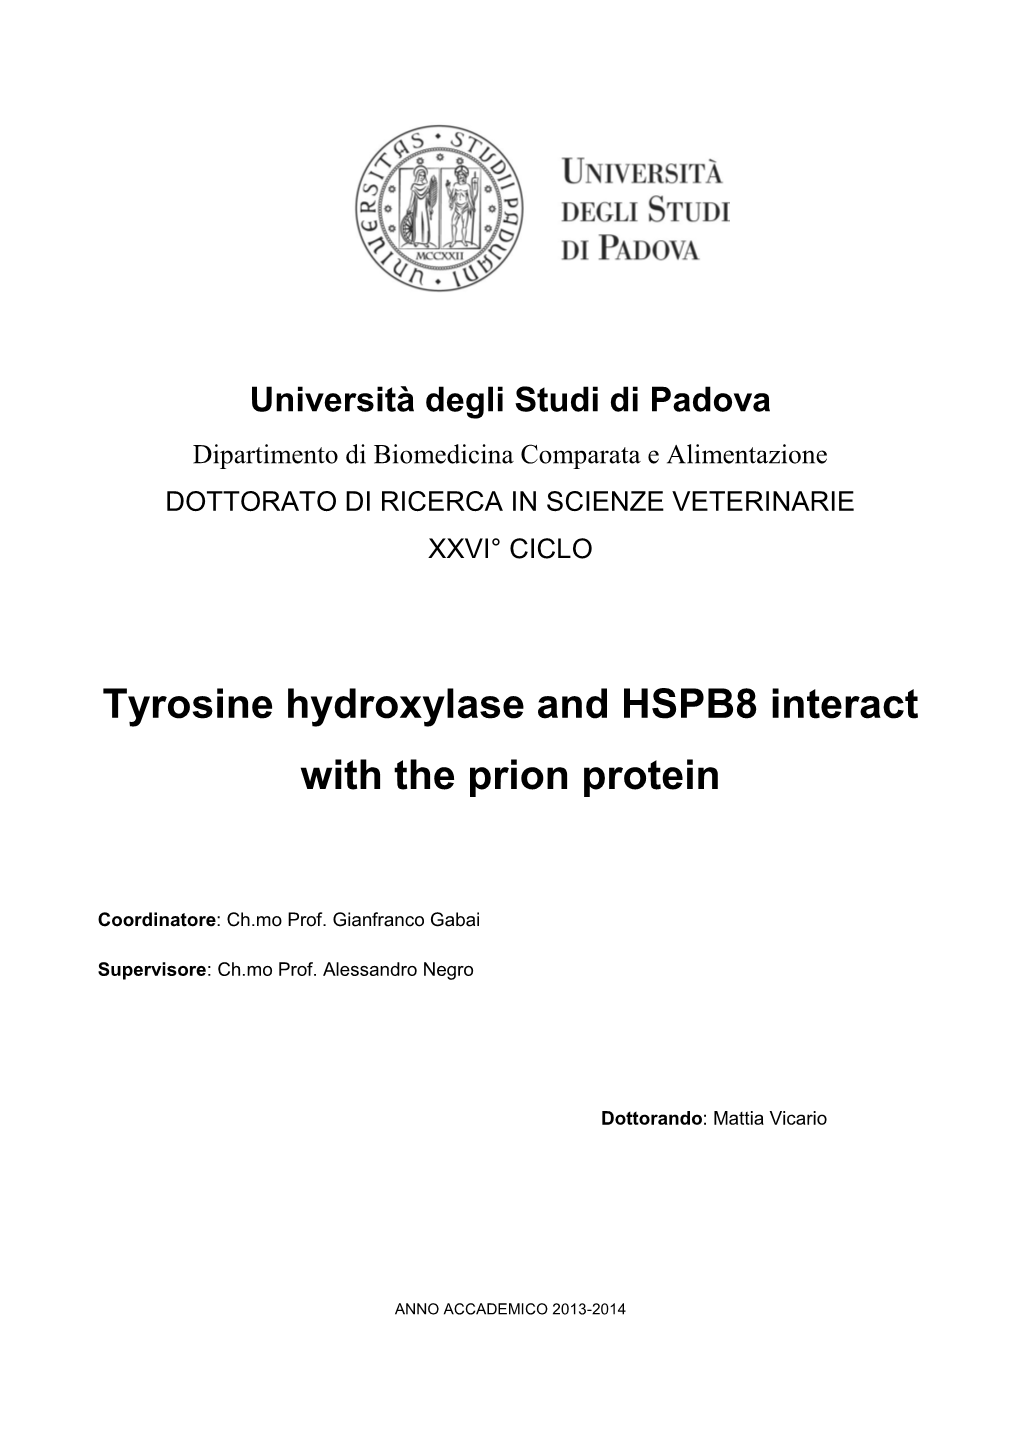 Tyrosine Hydroxylase and HSPB8 Interact with the Prion Protein